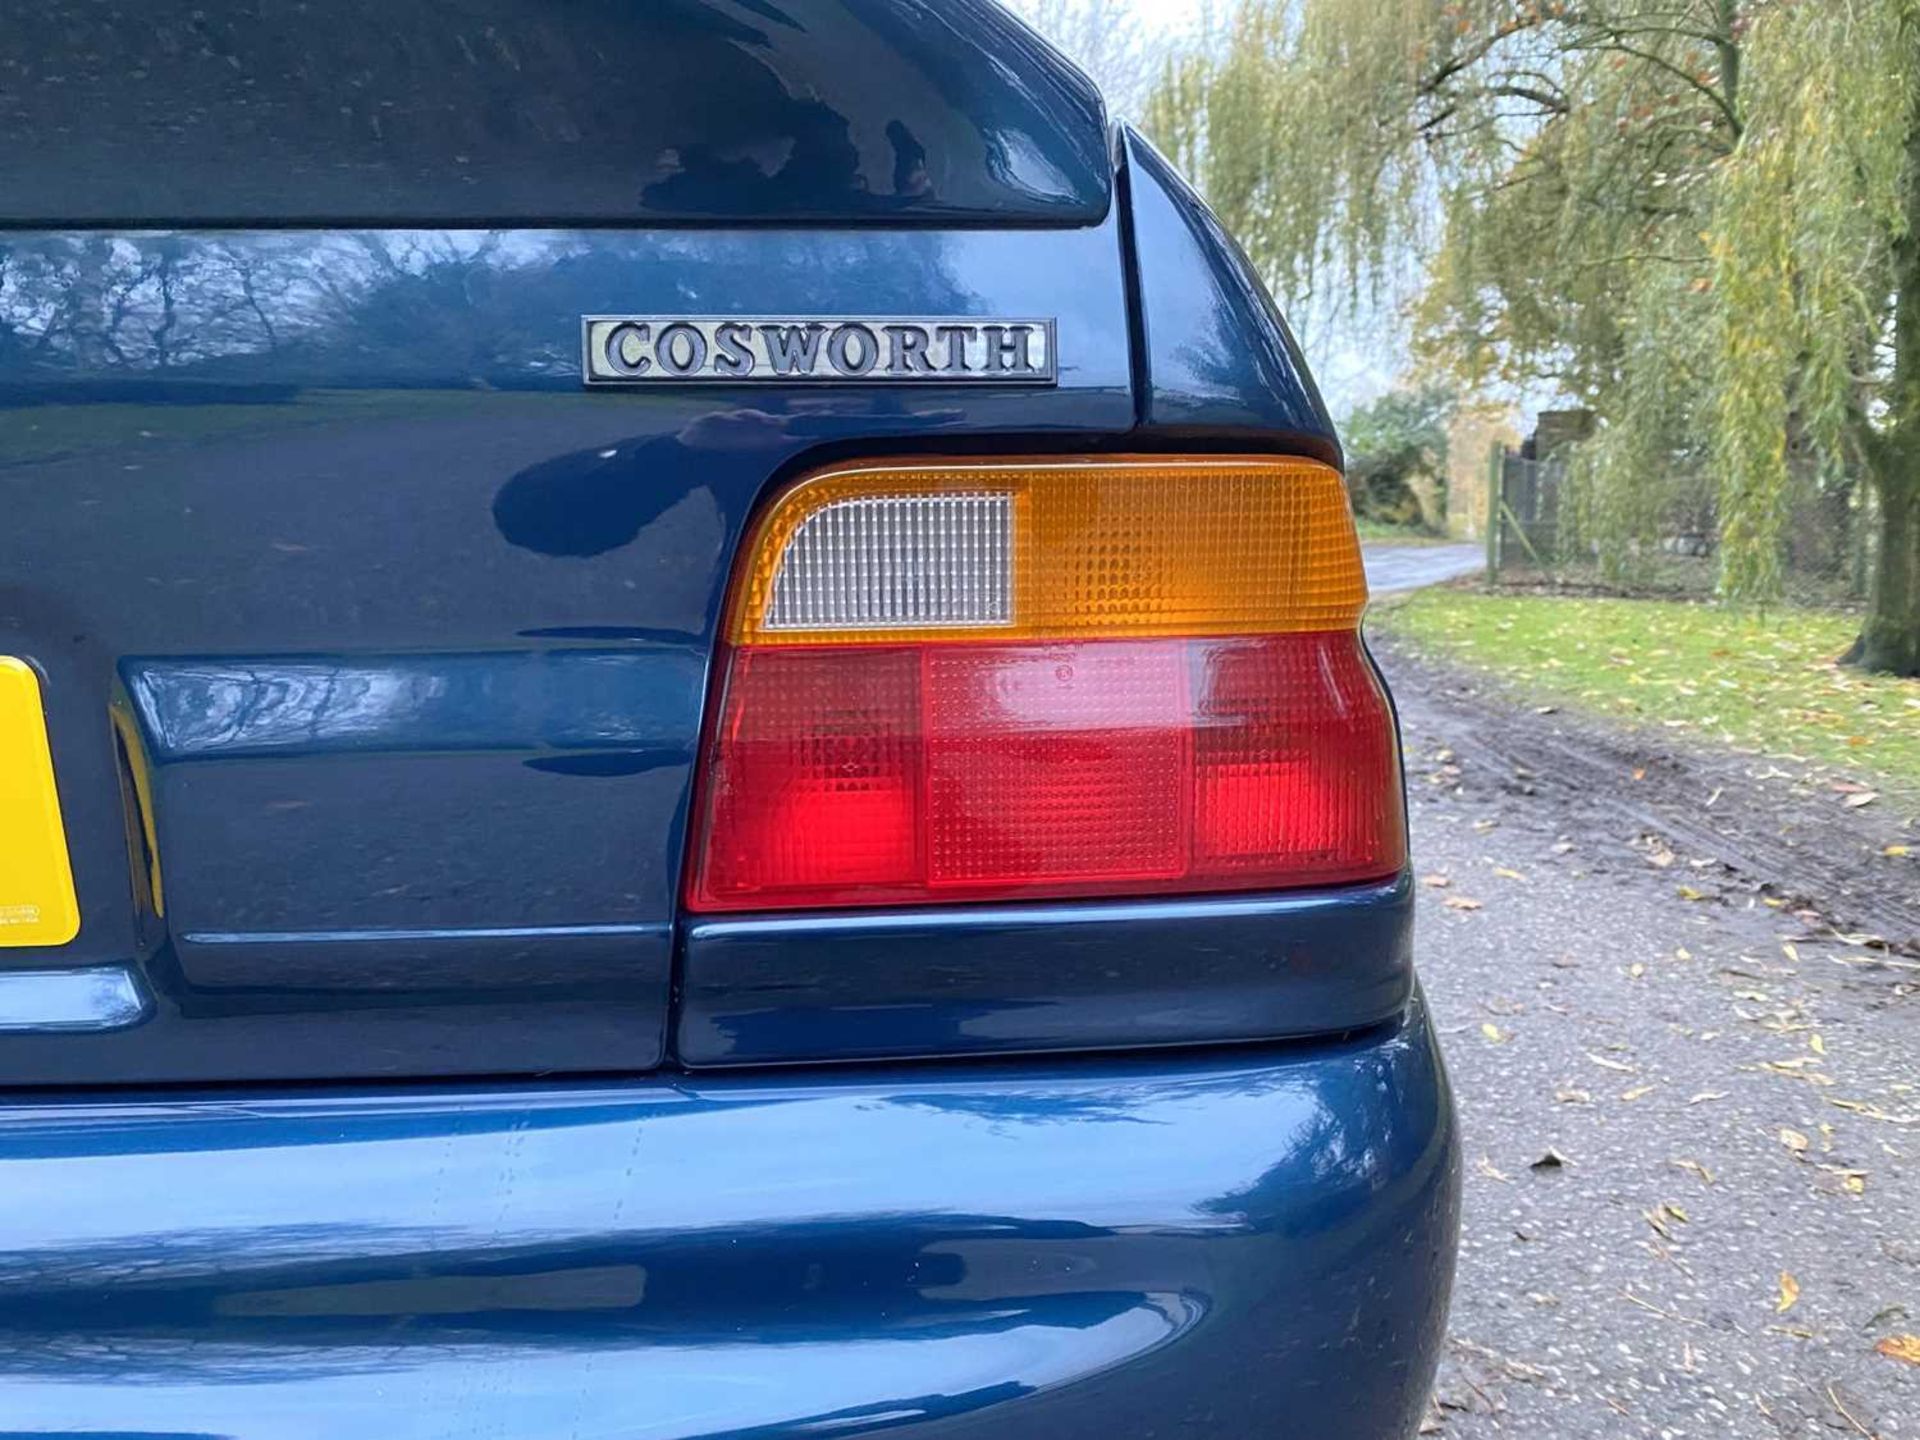 1995 Ford Escort RS Cosworth LUX Only 56,000 miles, finished in rare Petrol Blue - Image 88 of 98